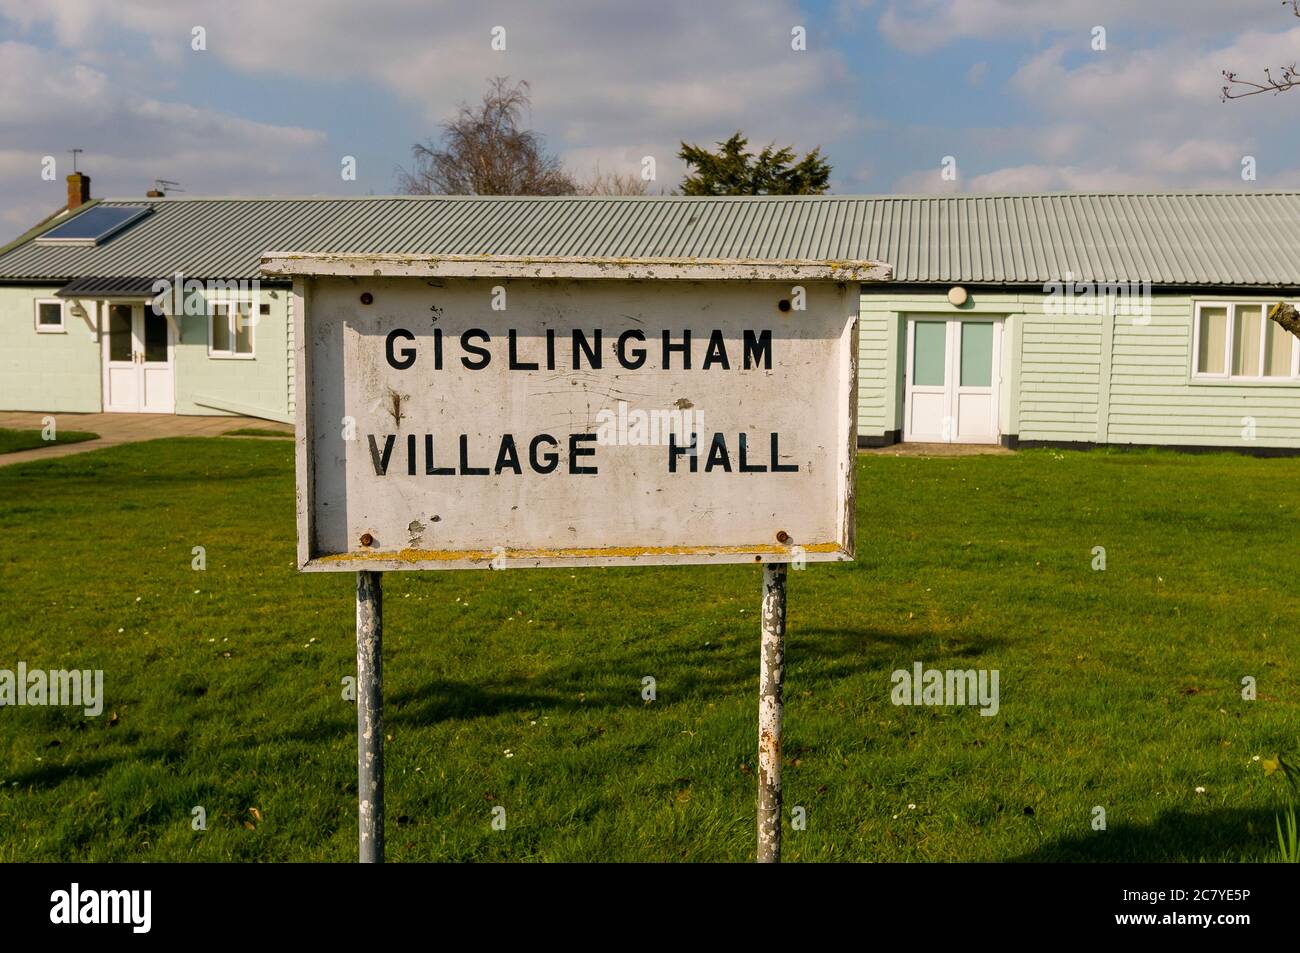 Gislingham, Suffolk, 21/03/2012  The Small Suffolk village of Gislingham  Picture: MARK BULLIMORE PHOTOGRAPHY Stock Photo